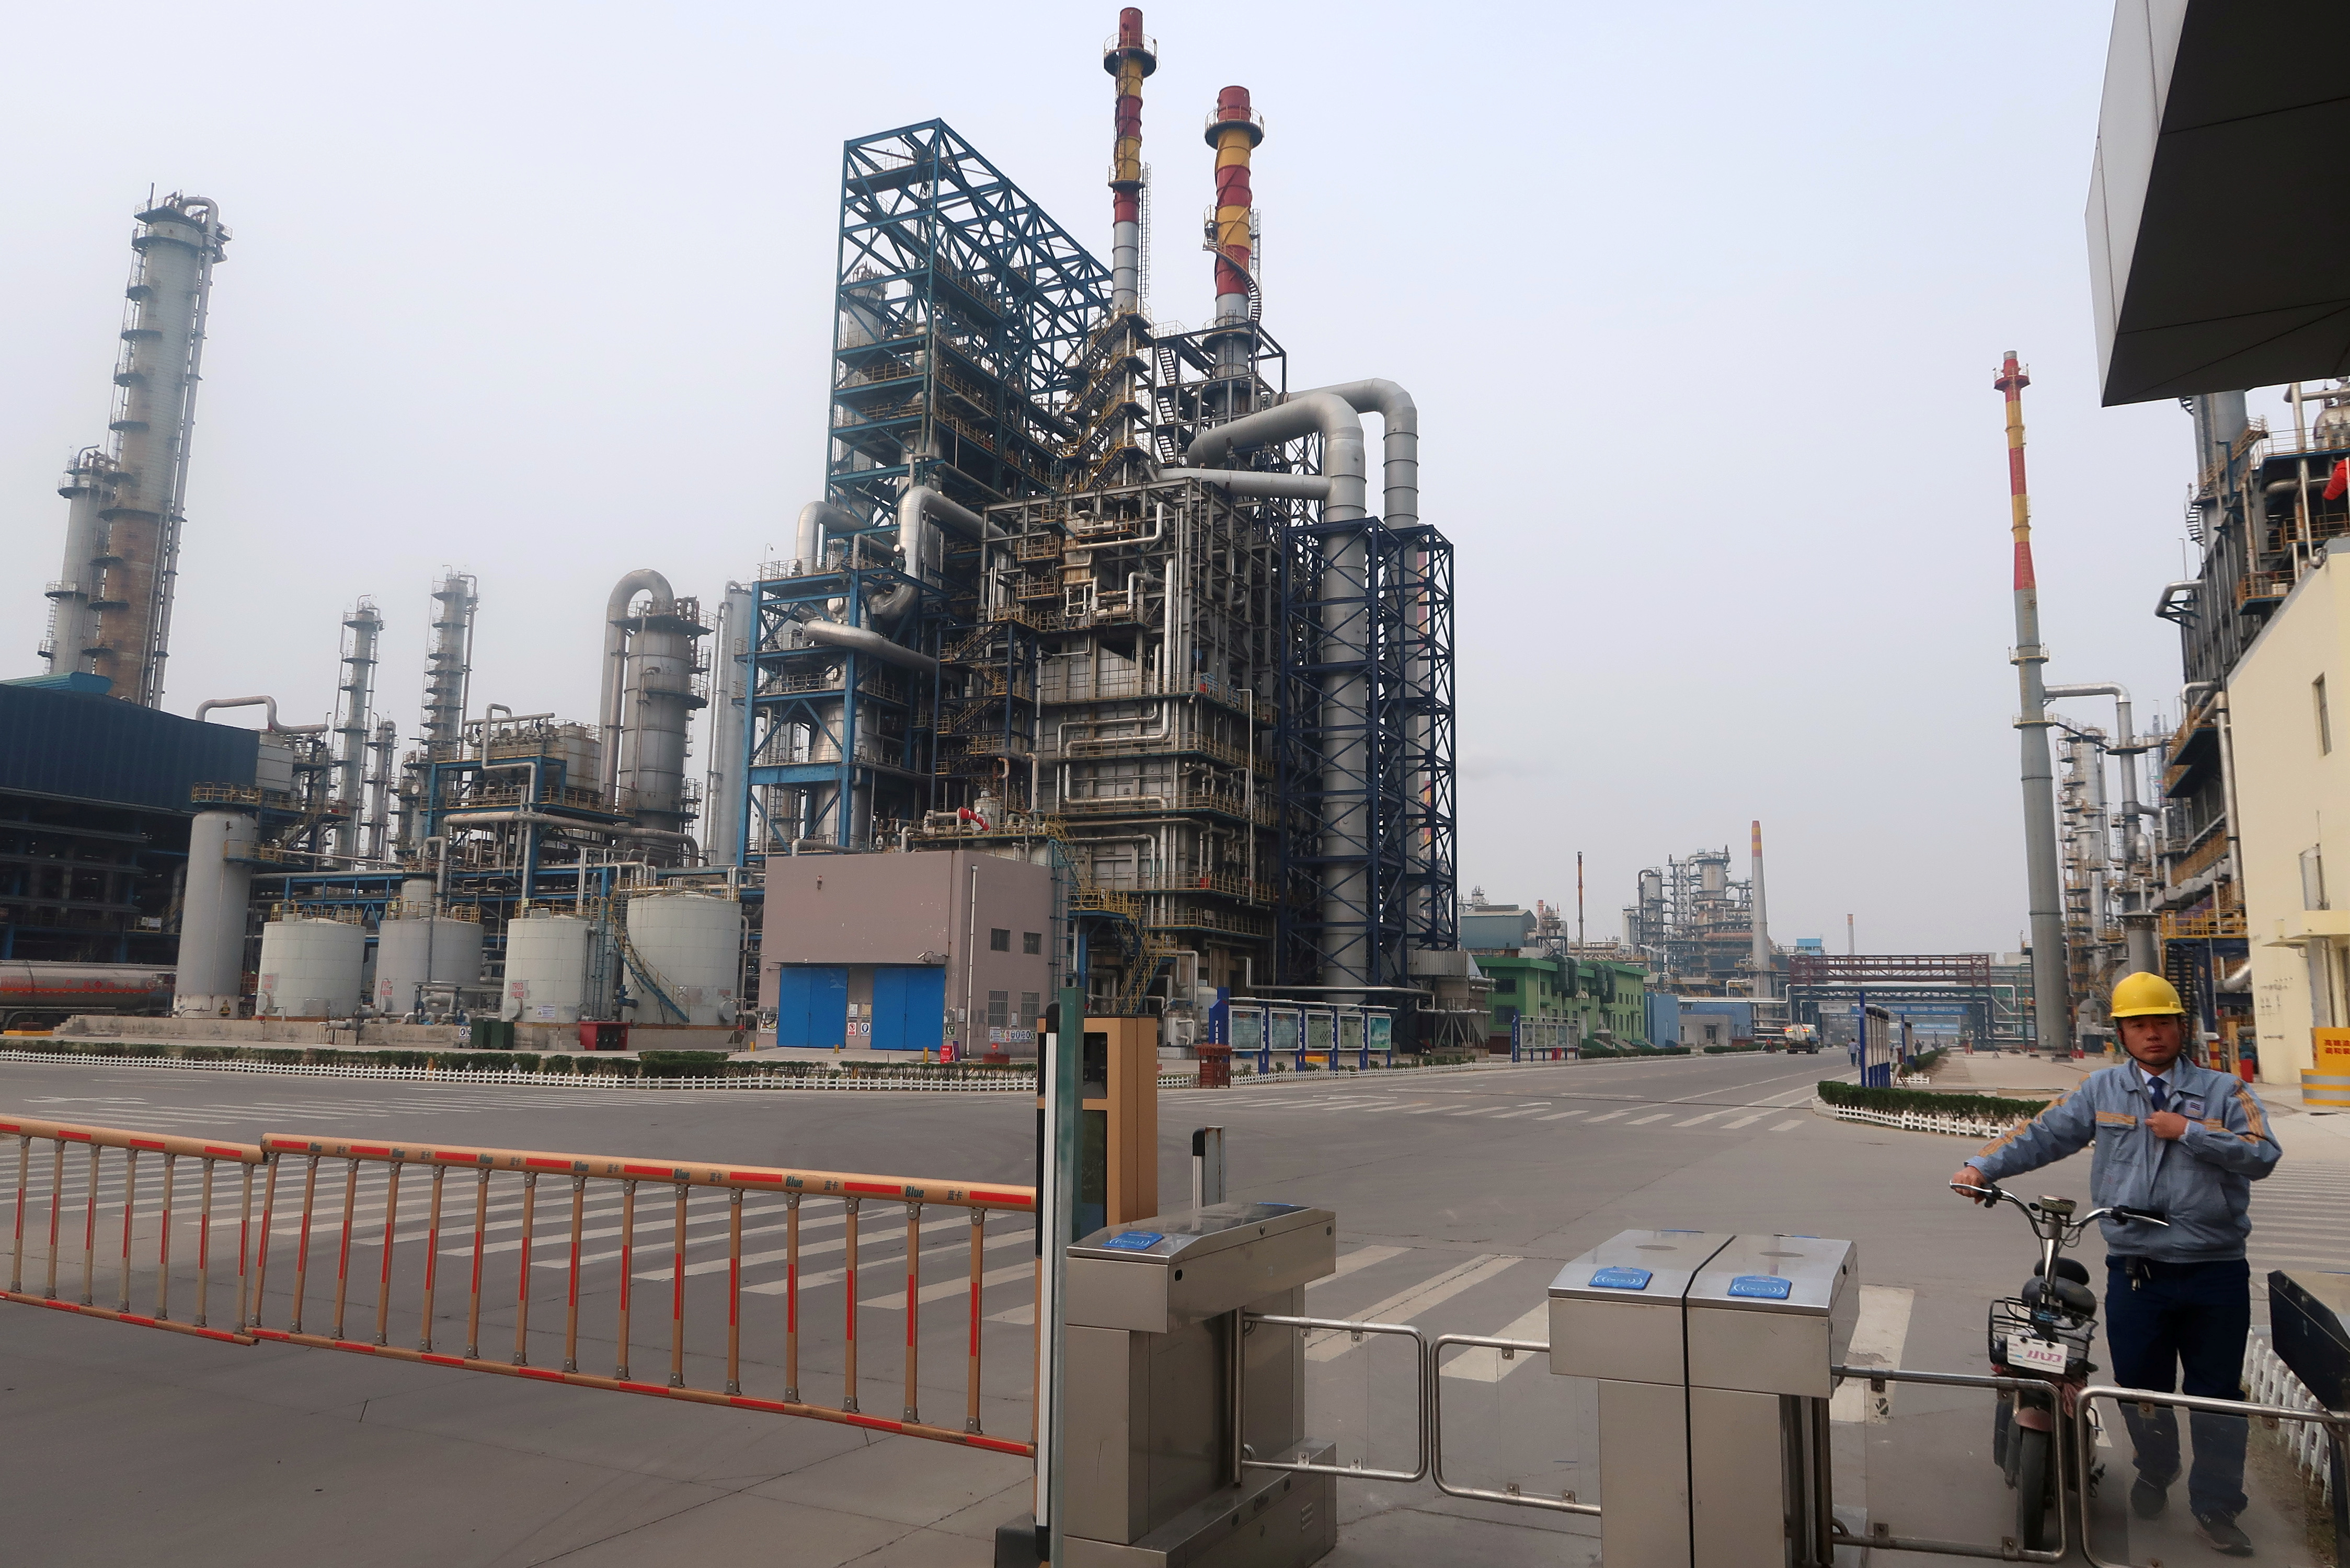 Man is seen at an exit of the refinery plants of Chambroad Petrochemicals in Binzhou, Shandong